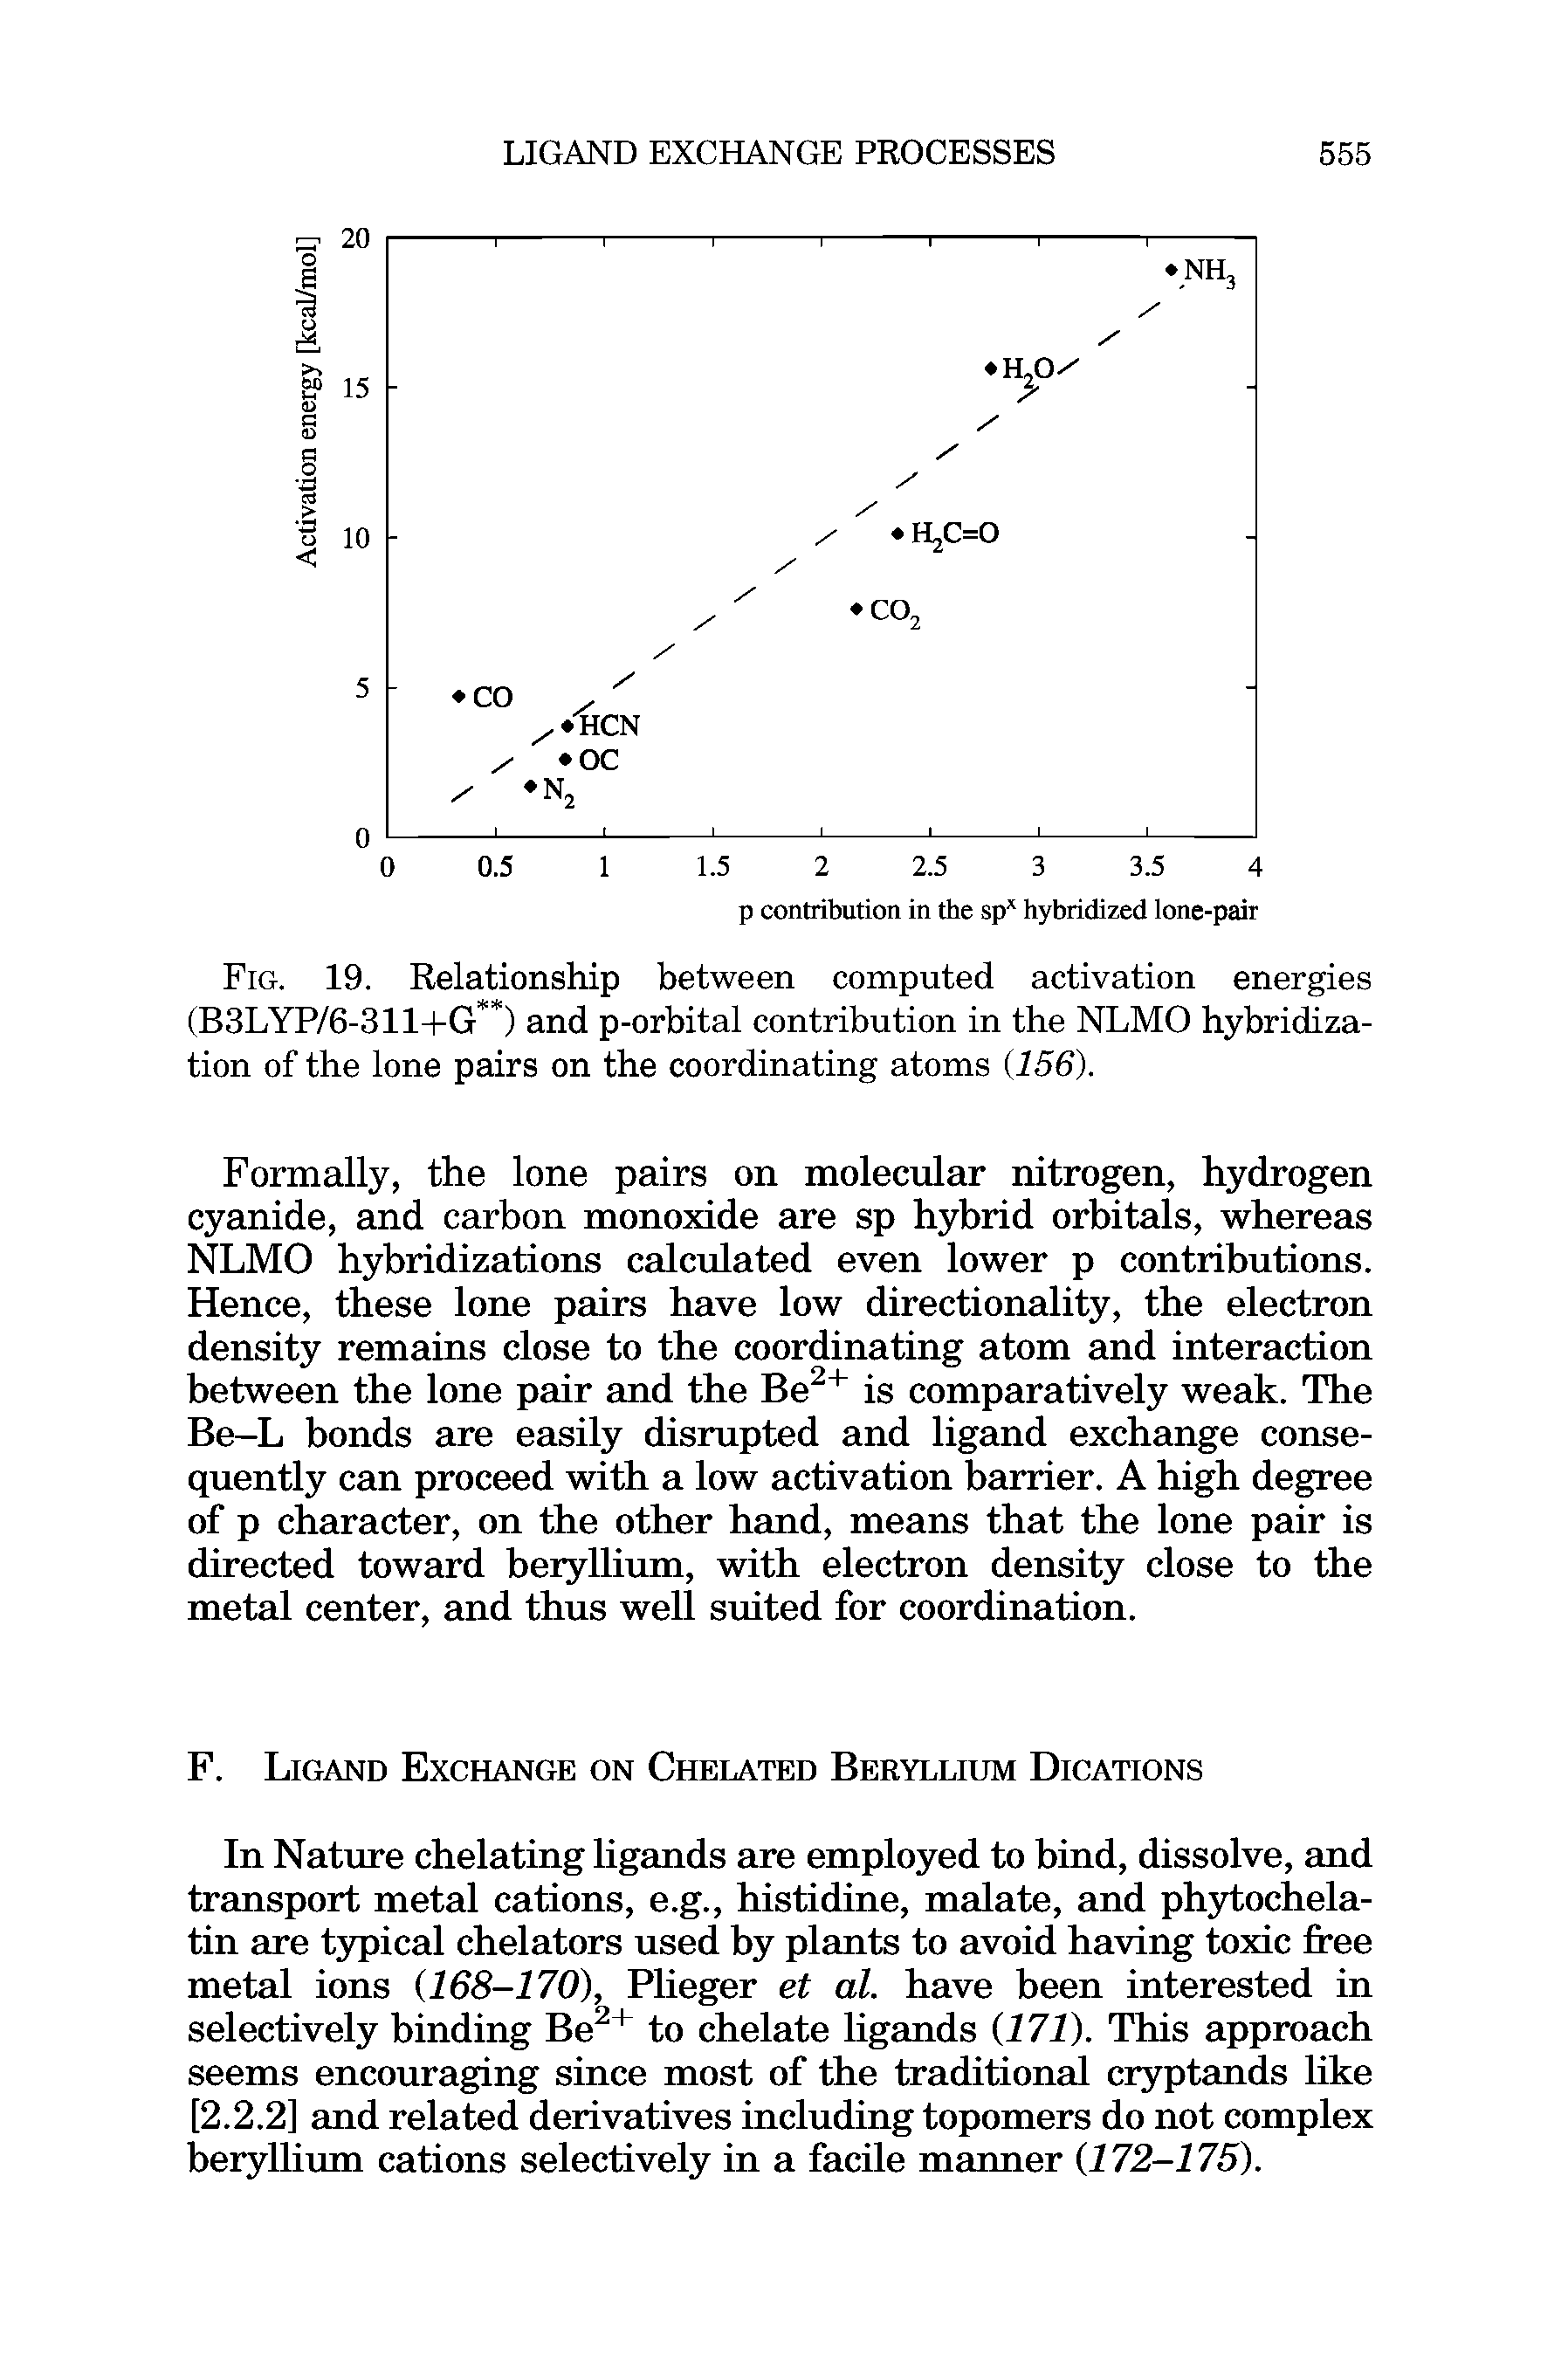 Fig. 19. Relationship between computed activation energies (B3LYP/6-311+G ) and p-orbital contribution in the NLMO hybridization of the lone pairs on the coordinating atoms (156).